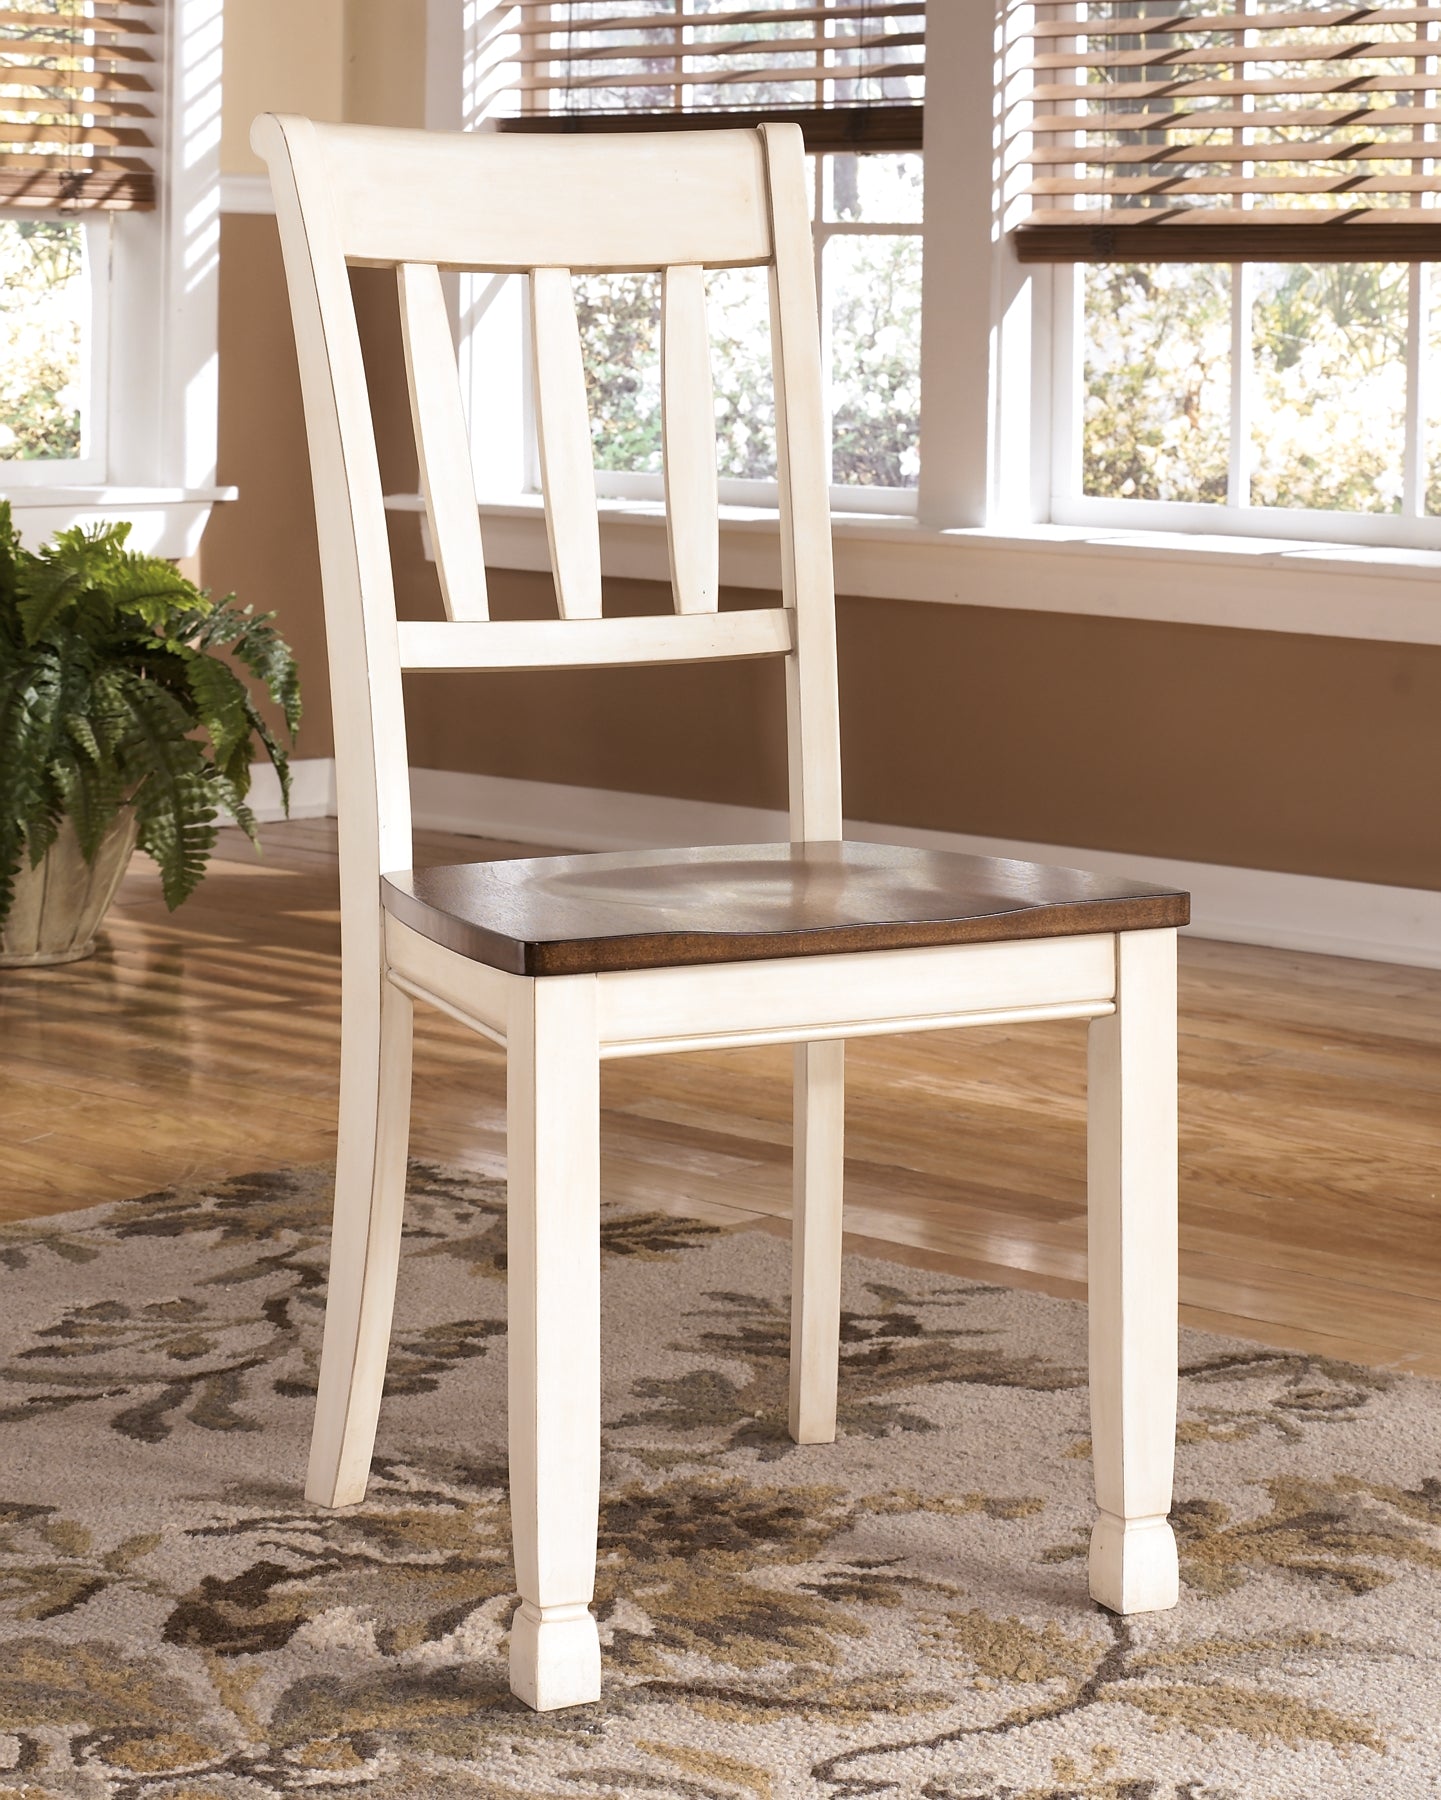 Whitesburg Dining Table and 4 Chairs and Bench with Storage JB's Furniture  Home Furniture, Home Decor, Furniture Store